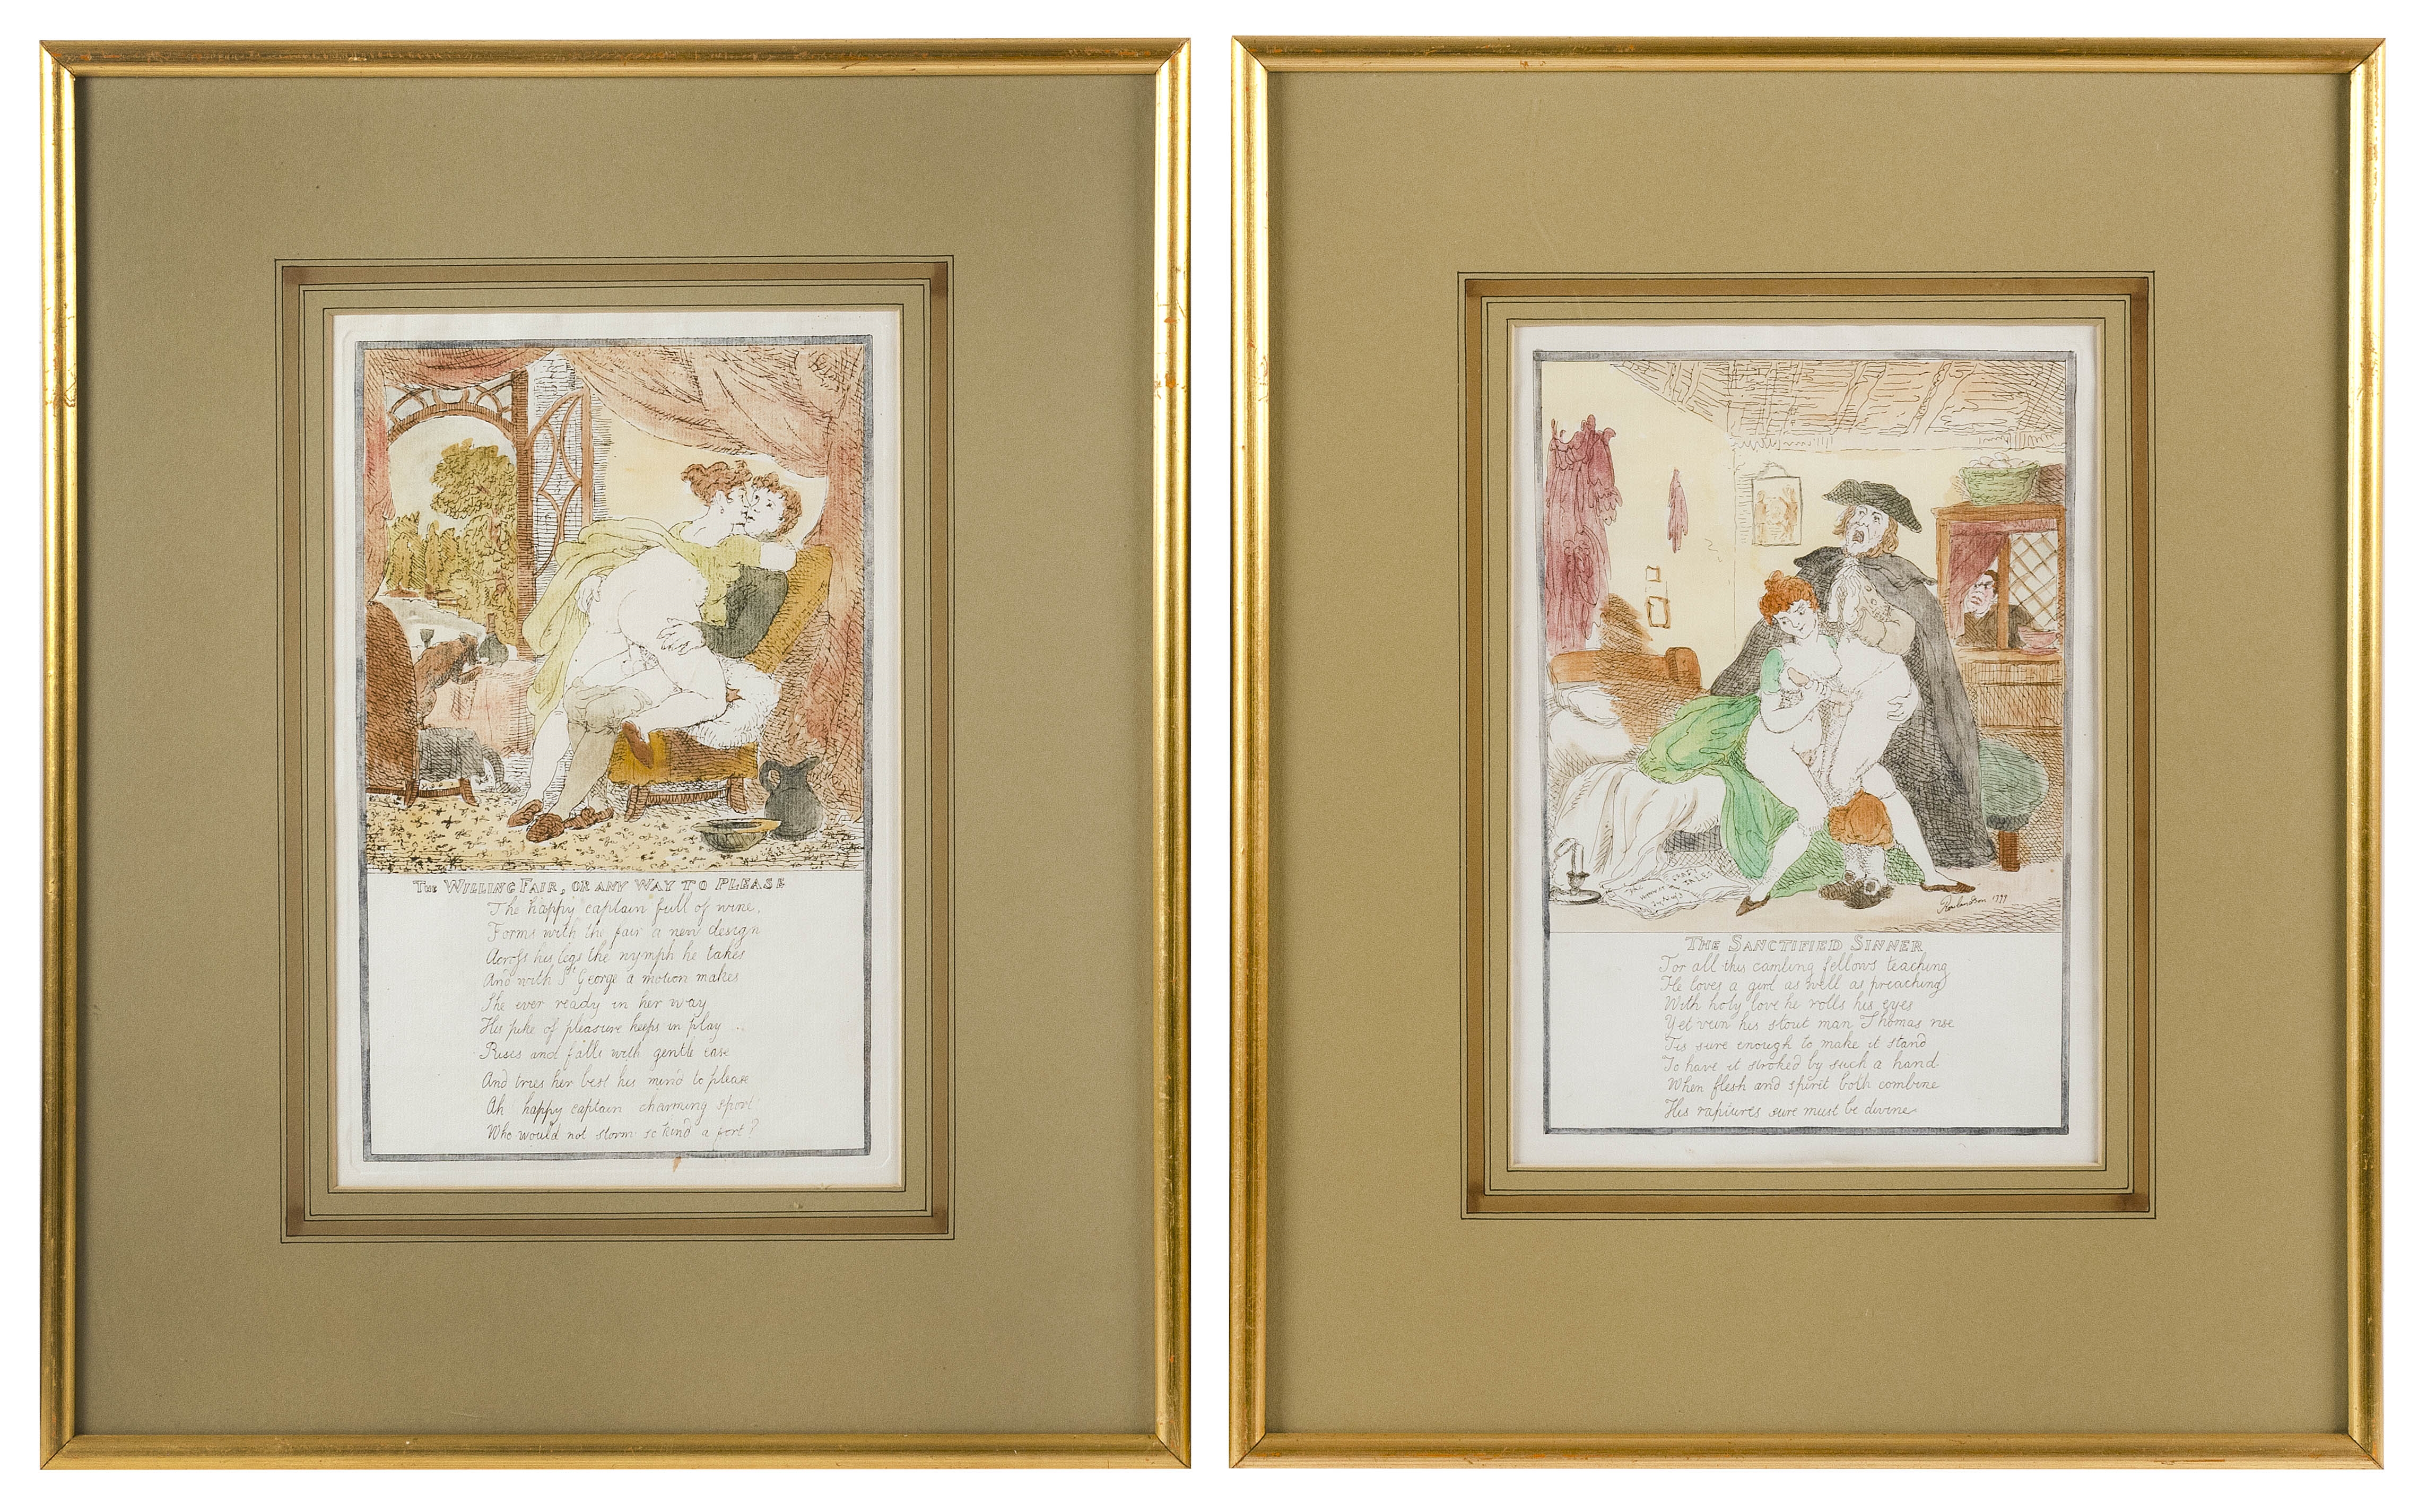 Artwork by Thomas Rowlandson, Four erotic poems and illustrations: The Sanctified Sinner", "The Willing Fair, or Any Way to Please", "The Country Squire New Mounted" and "The Toss Off", Made of etchings on copper plate